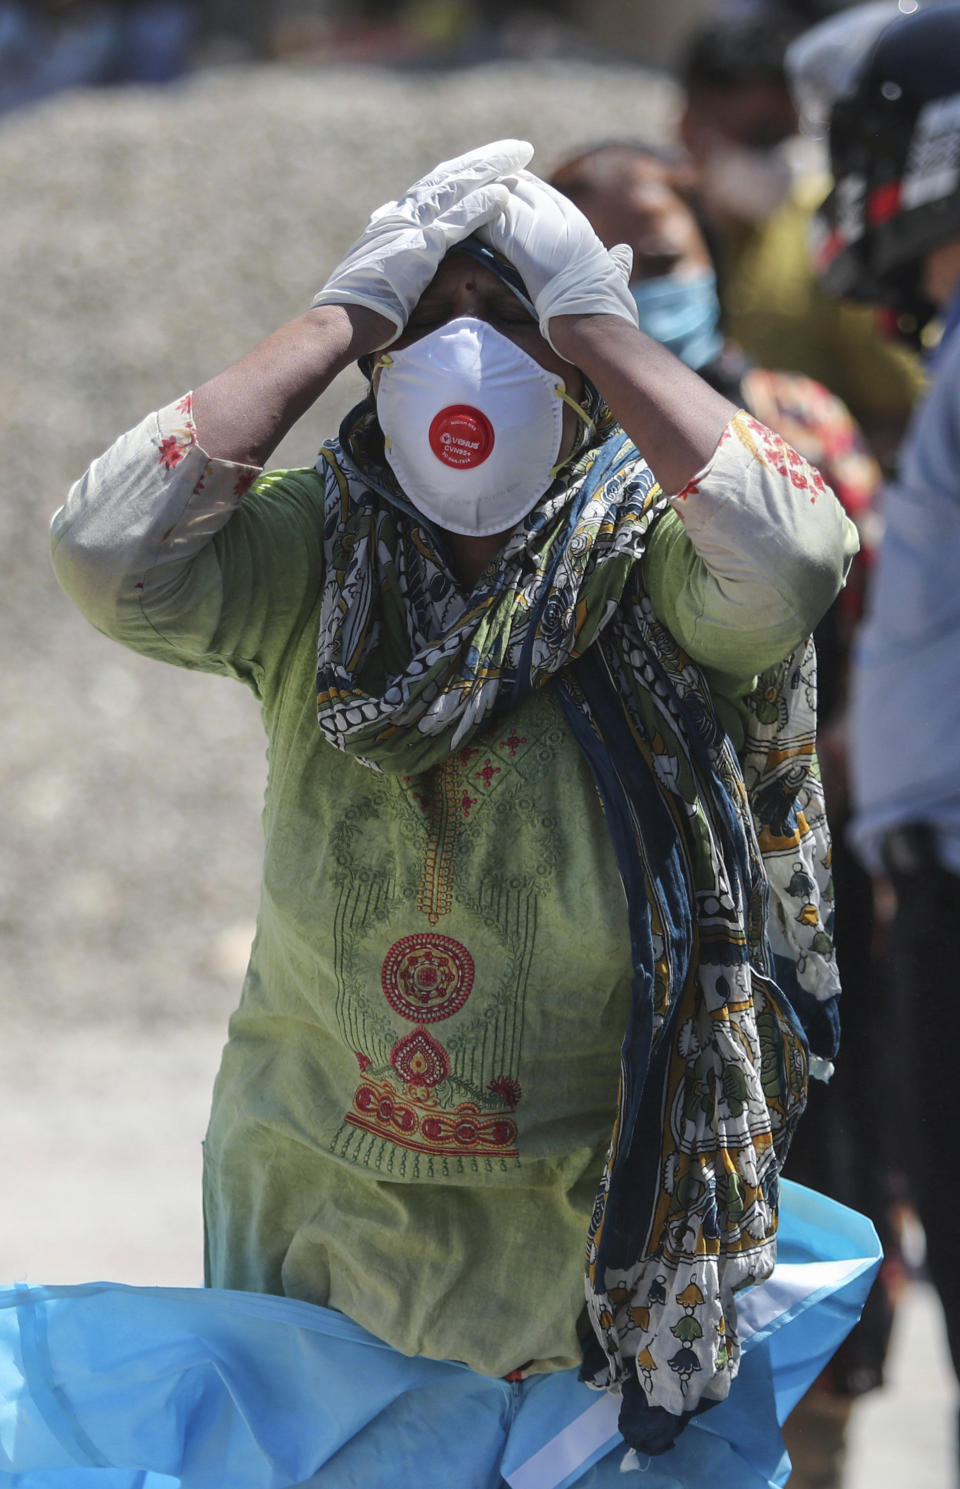 A relative of a person who died of COVID-19 reacts at a crematorium in Jammu, India, Sunday, April 25, 2021. India’s crematoriums and burial grounds are being overwhelmed by the devastating new surge of infections tearing through the populous country with terrifying speed, depleting the supply of life-saving oxygen to critical levels and leaving patients to die while waiting in line to see doctors. (AP Photo/Channi Anand)